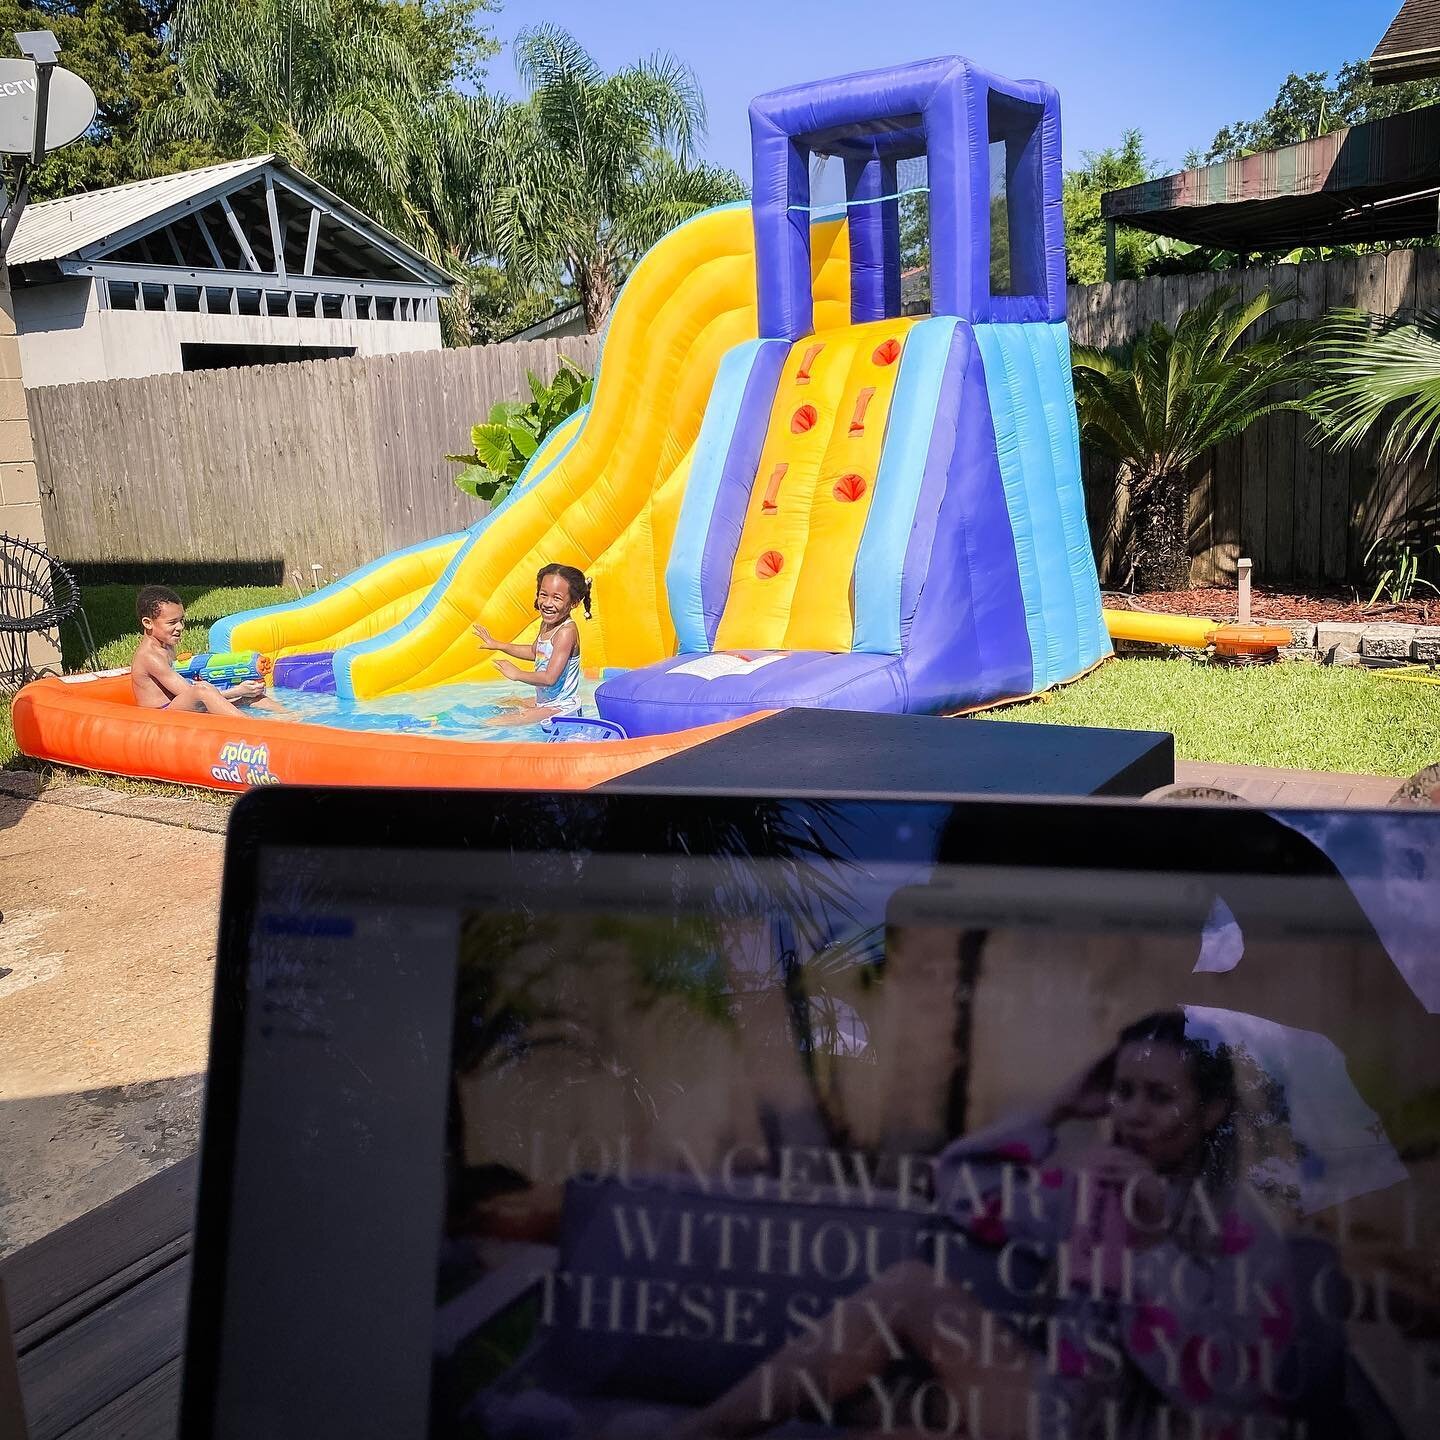 #fakefall strikes again. Oh well, since it&rsquo;s hot as you know what, we pulled out the slide for the kids. Taking advantage while we can. I hope everyone is having a relaxing Sunday. I&rsquo;m currently updating my blog and marinating salmon. wis